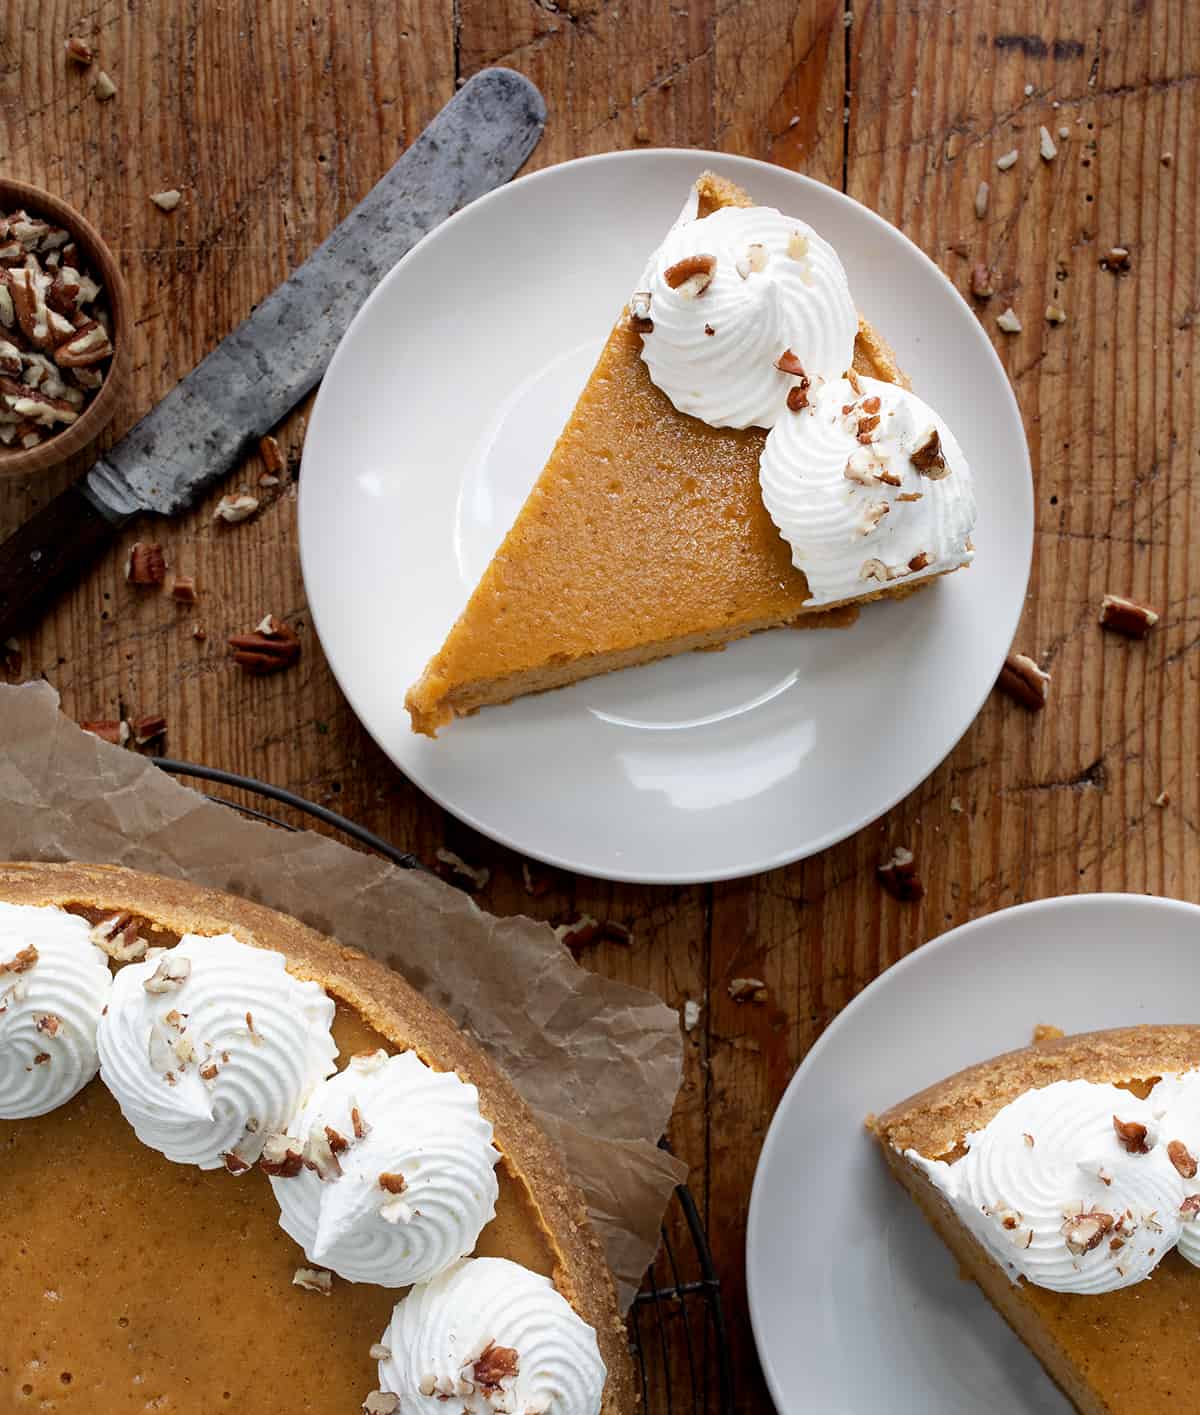 Pumpkin Cheesecake on a Wooden Table with Pieces on Plates from Overhead.